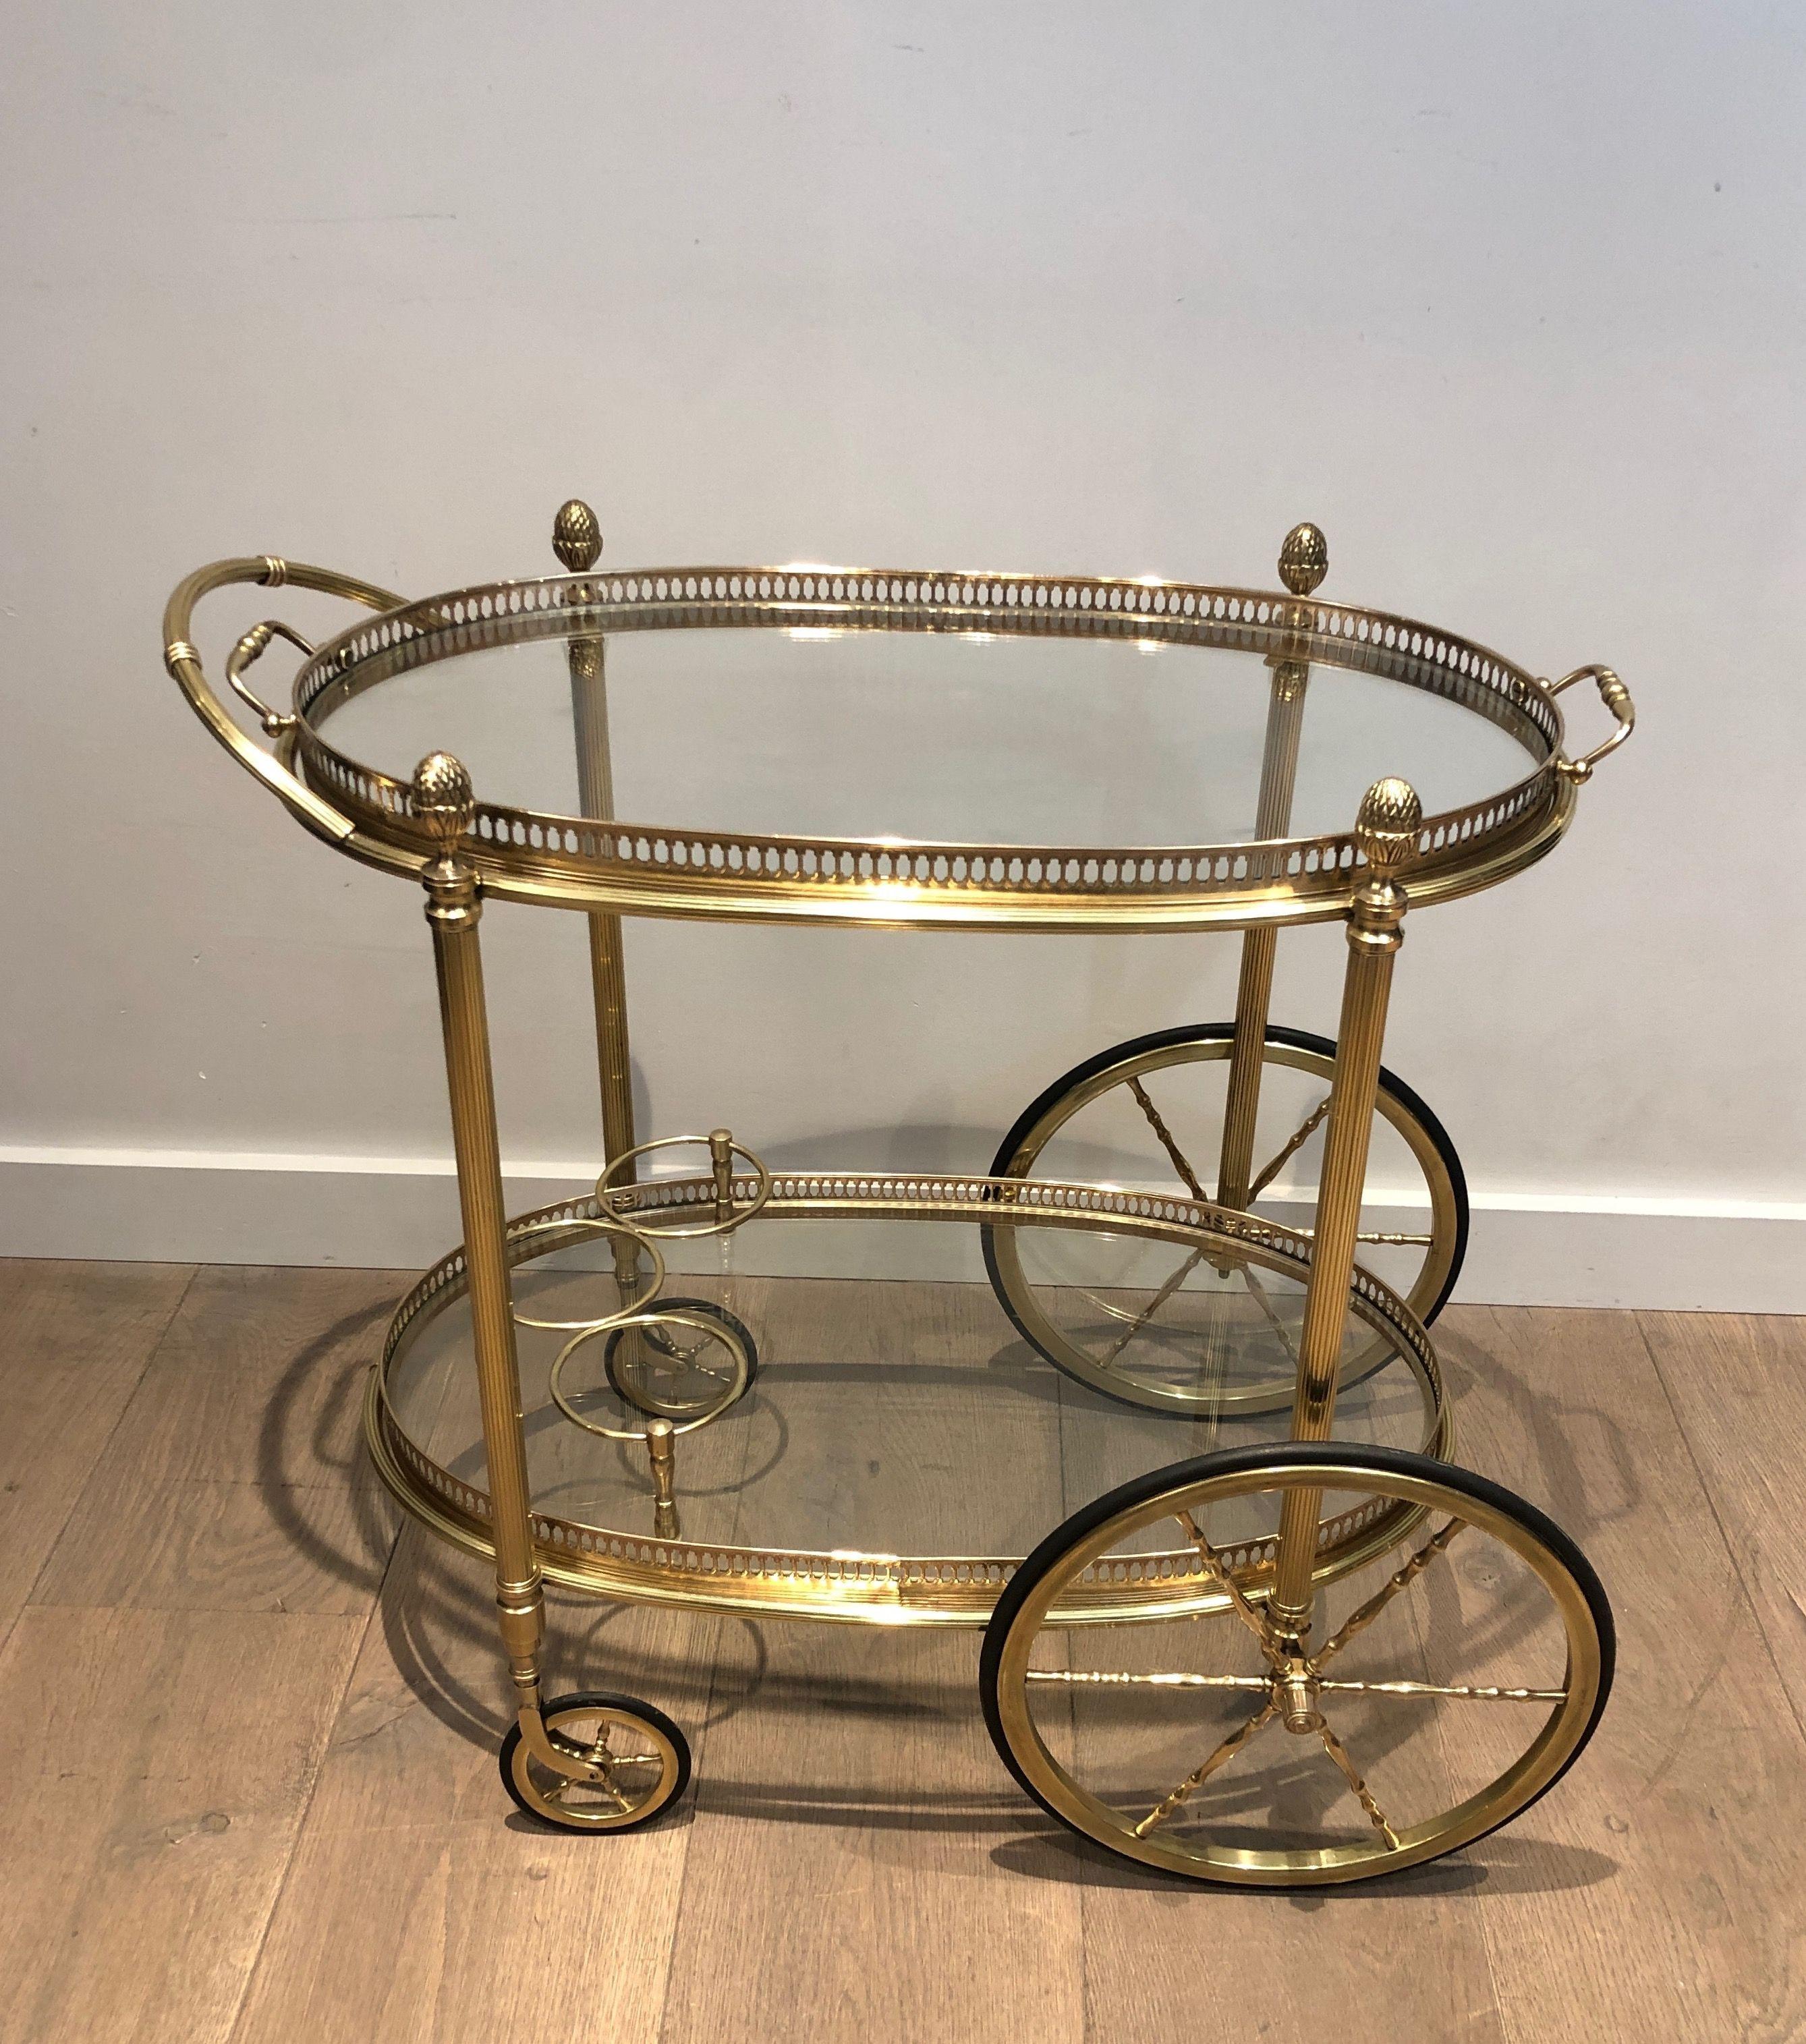 This neoclassical style oval bar cart is all made of brass. It has two removable oval trays made of glass and surrounded by a delicate brass gallery. This is a French work by famous designer Maison Bagués. Circa 1940.